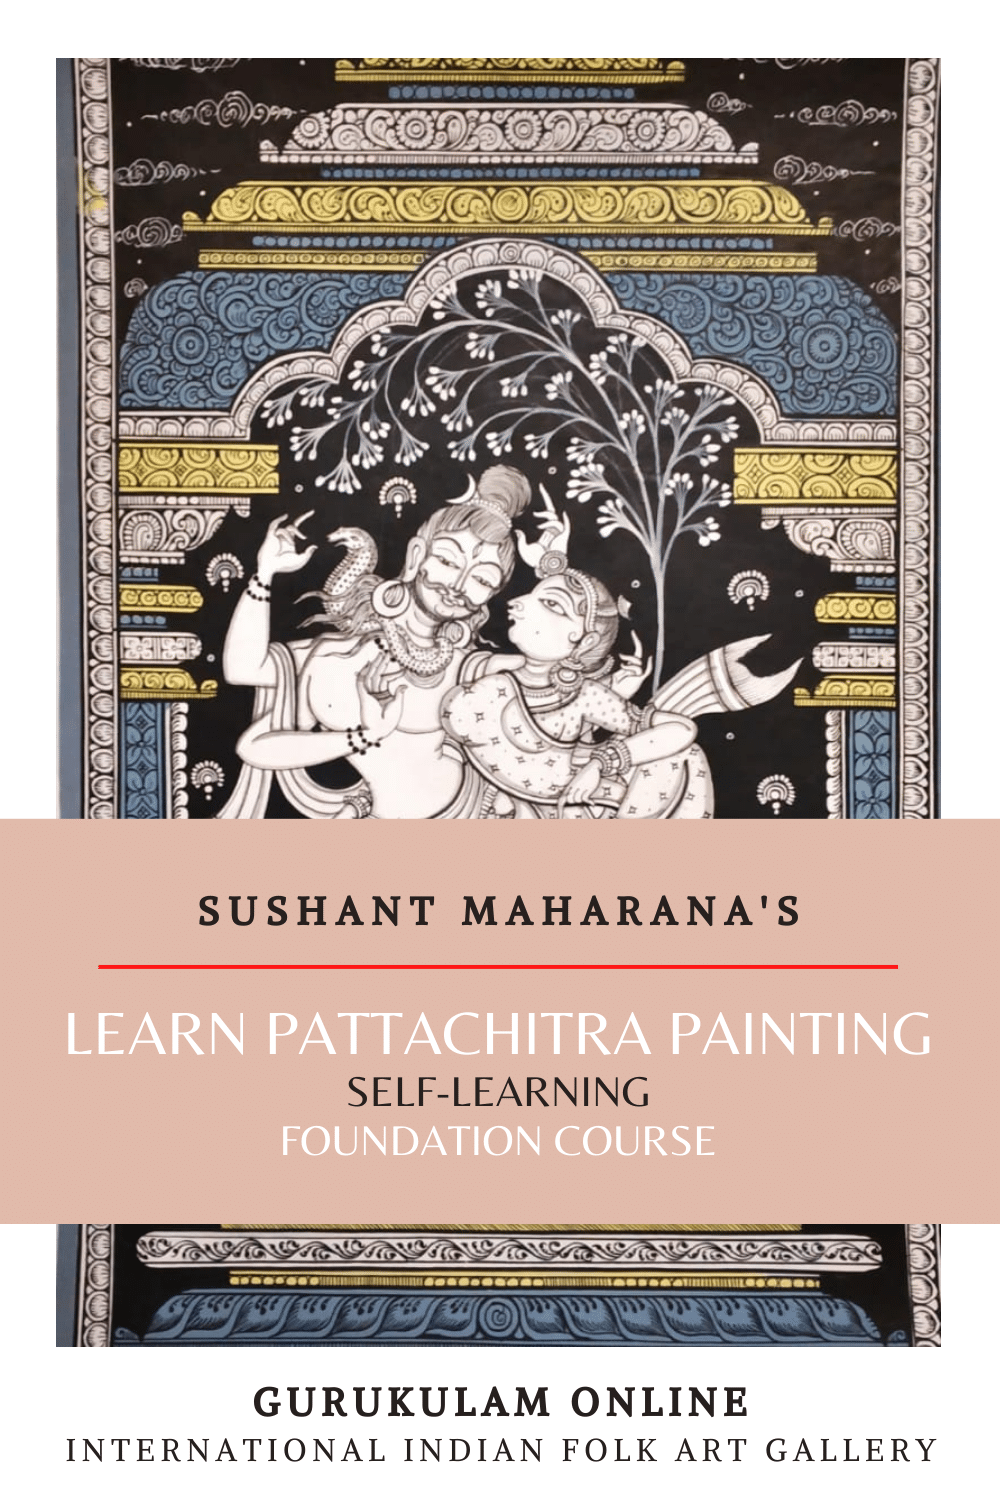 SM01 – Learn Pattachitra Painting, Foundation Course [Online, Self Learning]